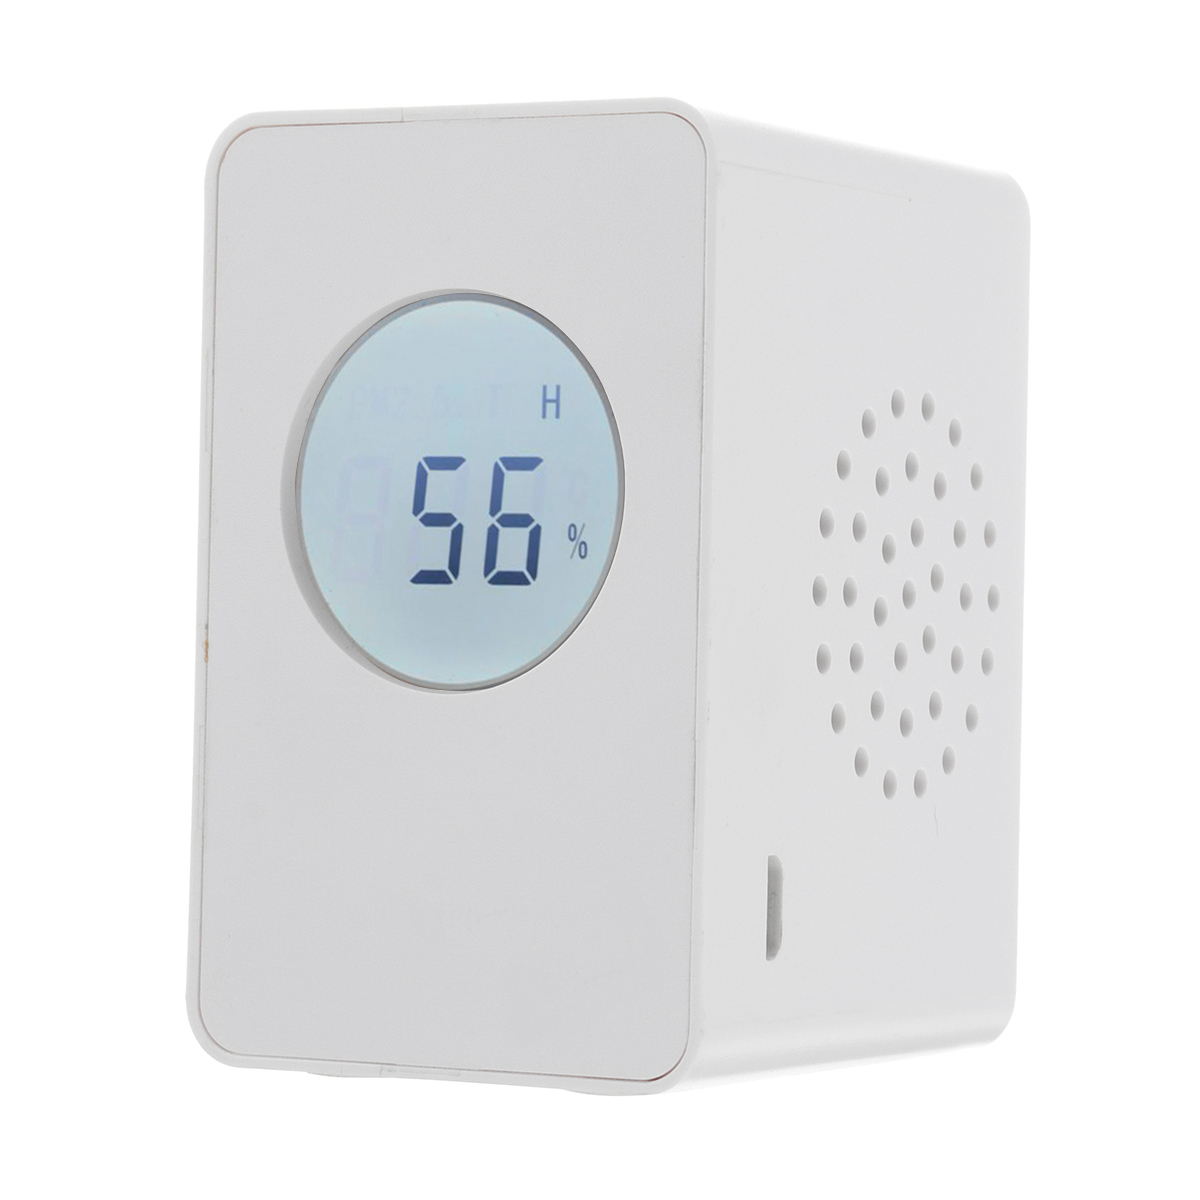 Portable-PM25-Temperature-Humidy-Detector-Air-Quality-Tester-Meter-Monitor-Home-1469905-3